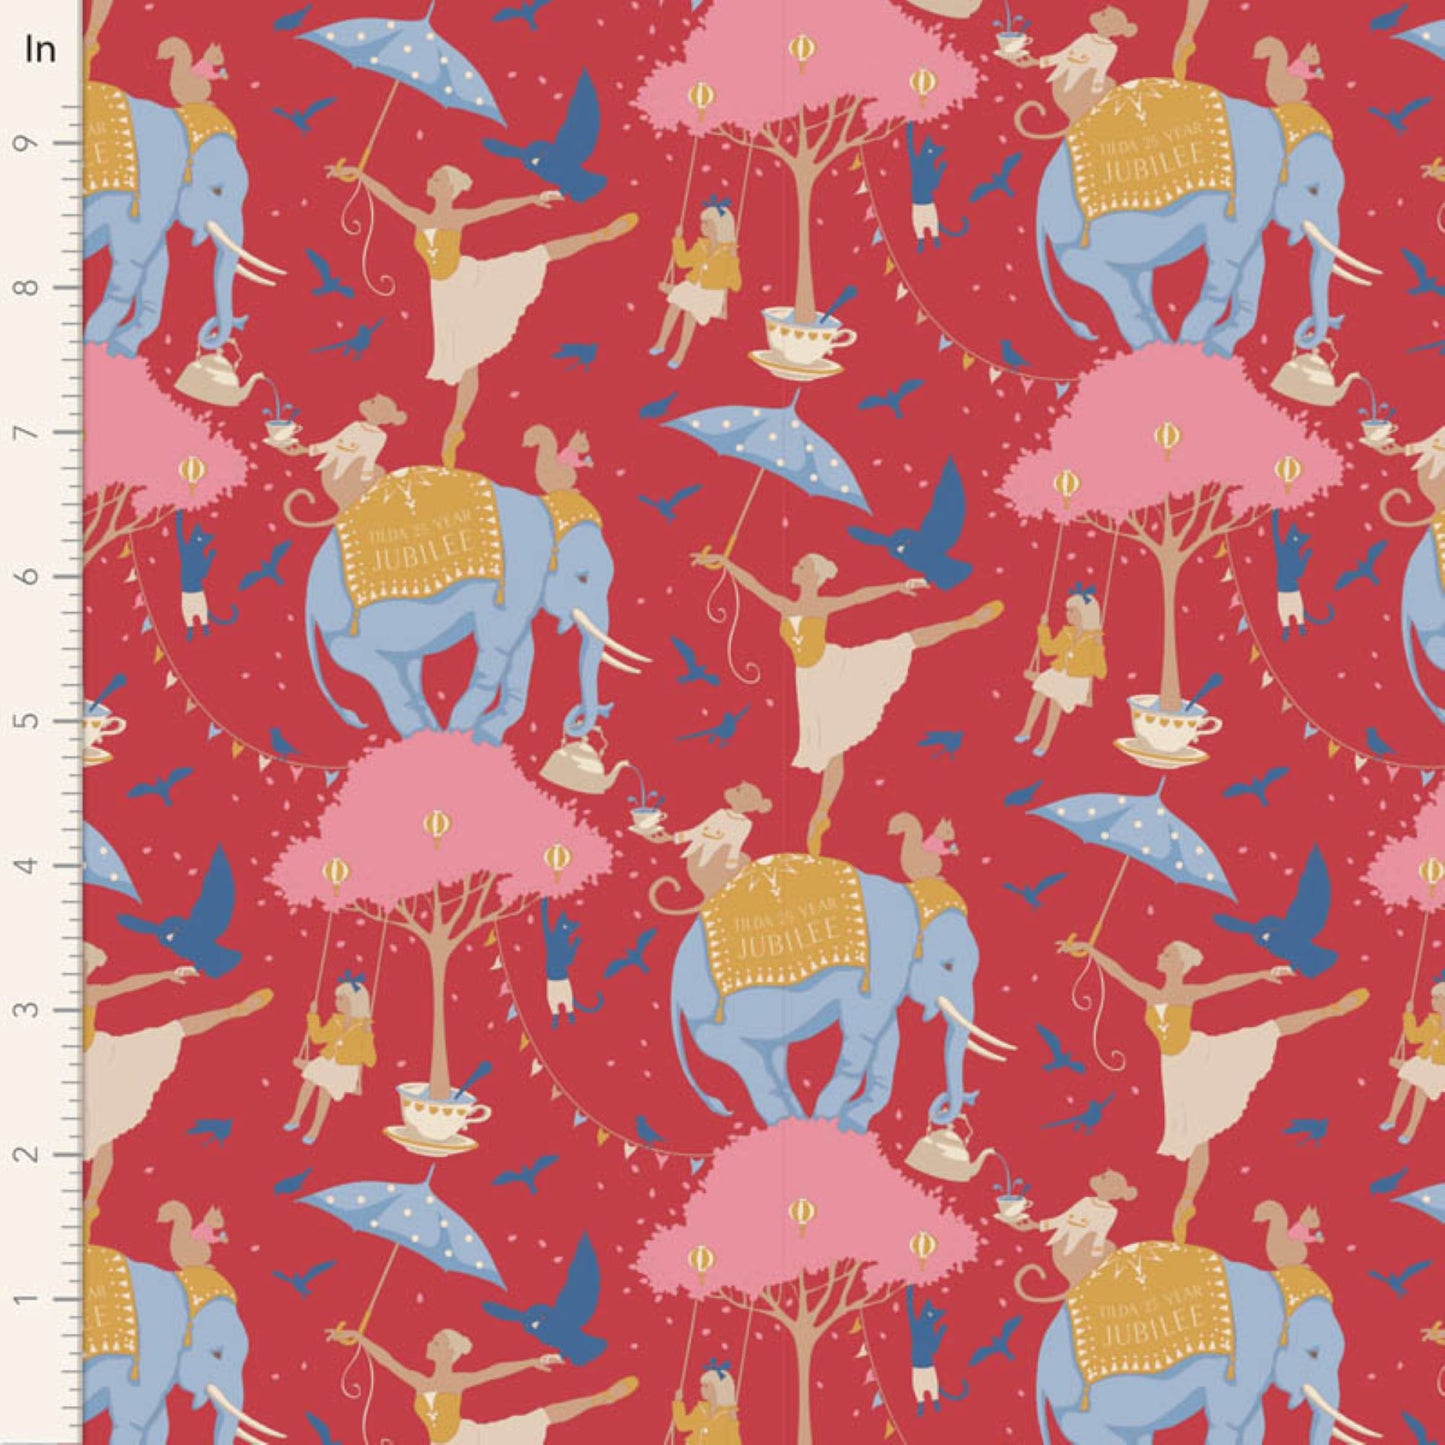 Tilda Jubilee Circus Life red elephants acrobats cotton quilt fabric by the FQ + MORE